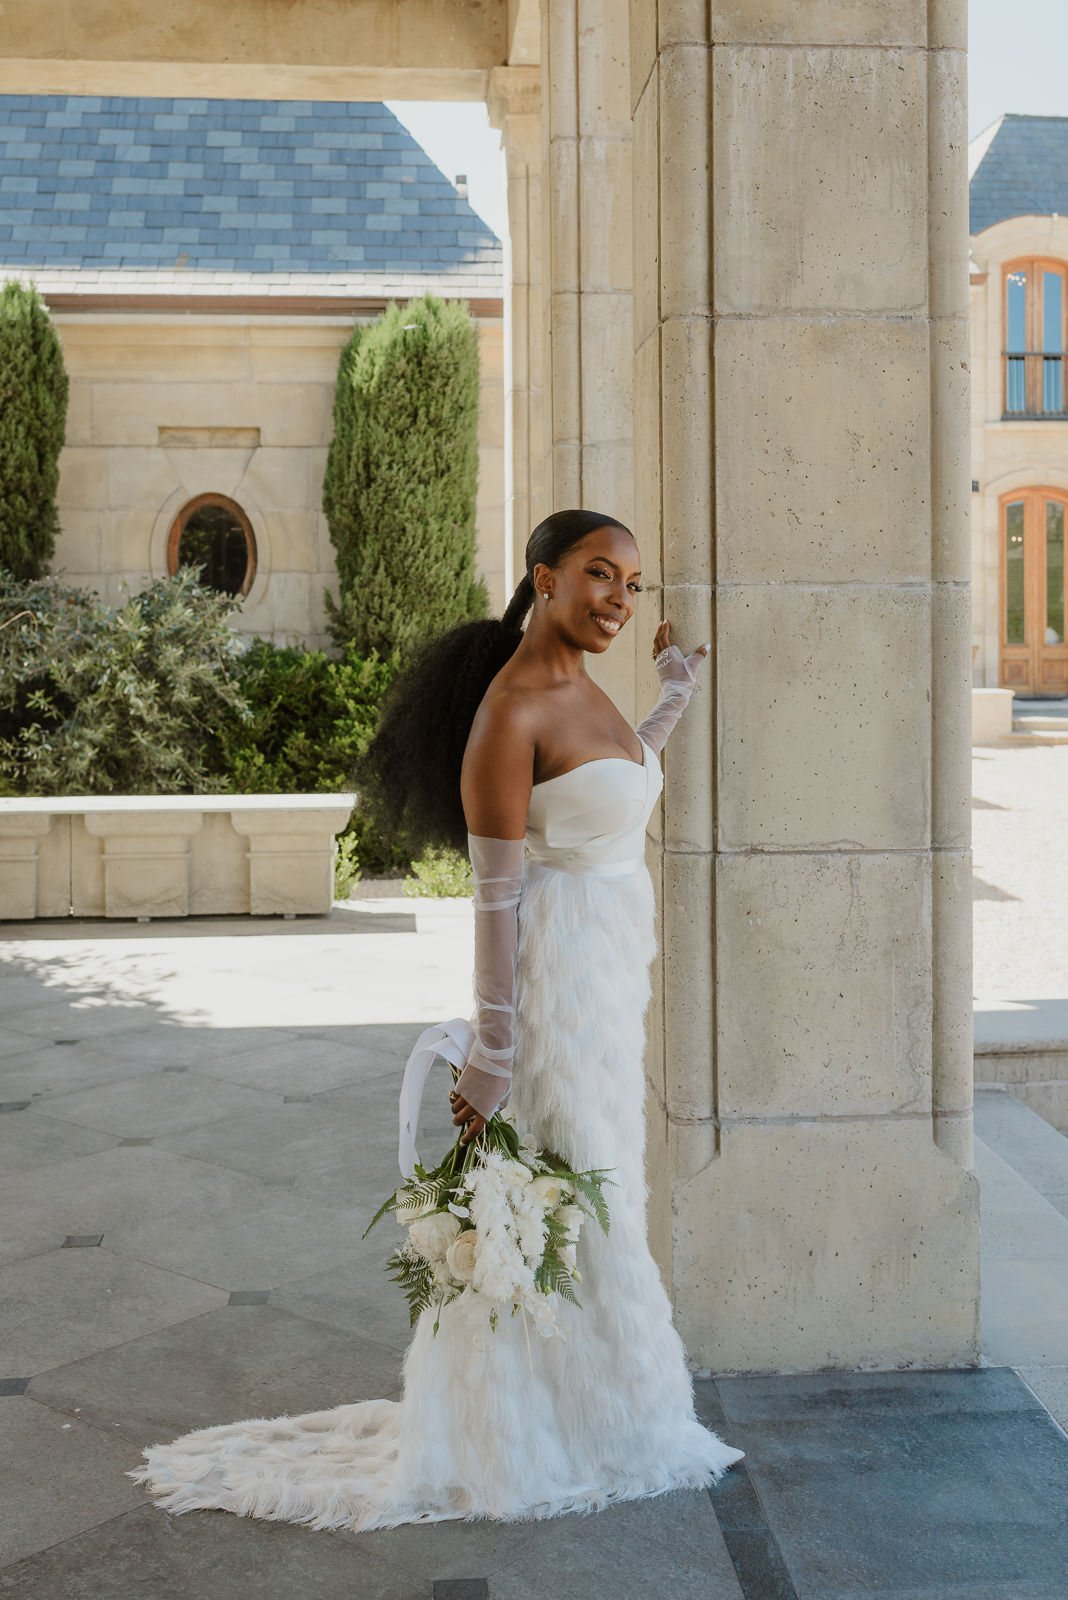 Beautiful bride Jobina wore the Ivy skirt and Riley top | Wedding dress by Halfpenny London